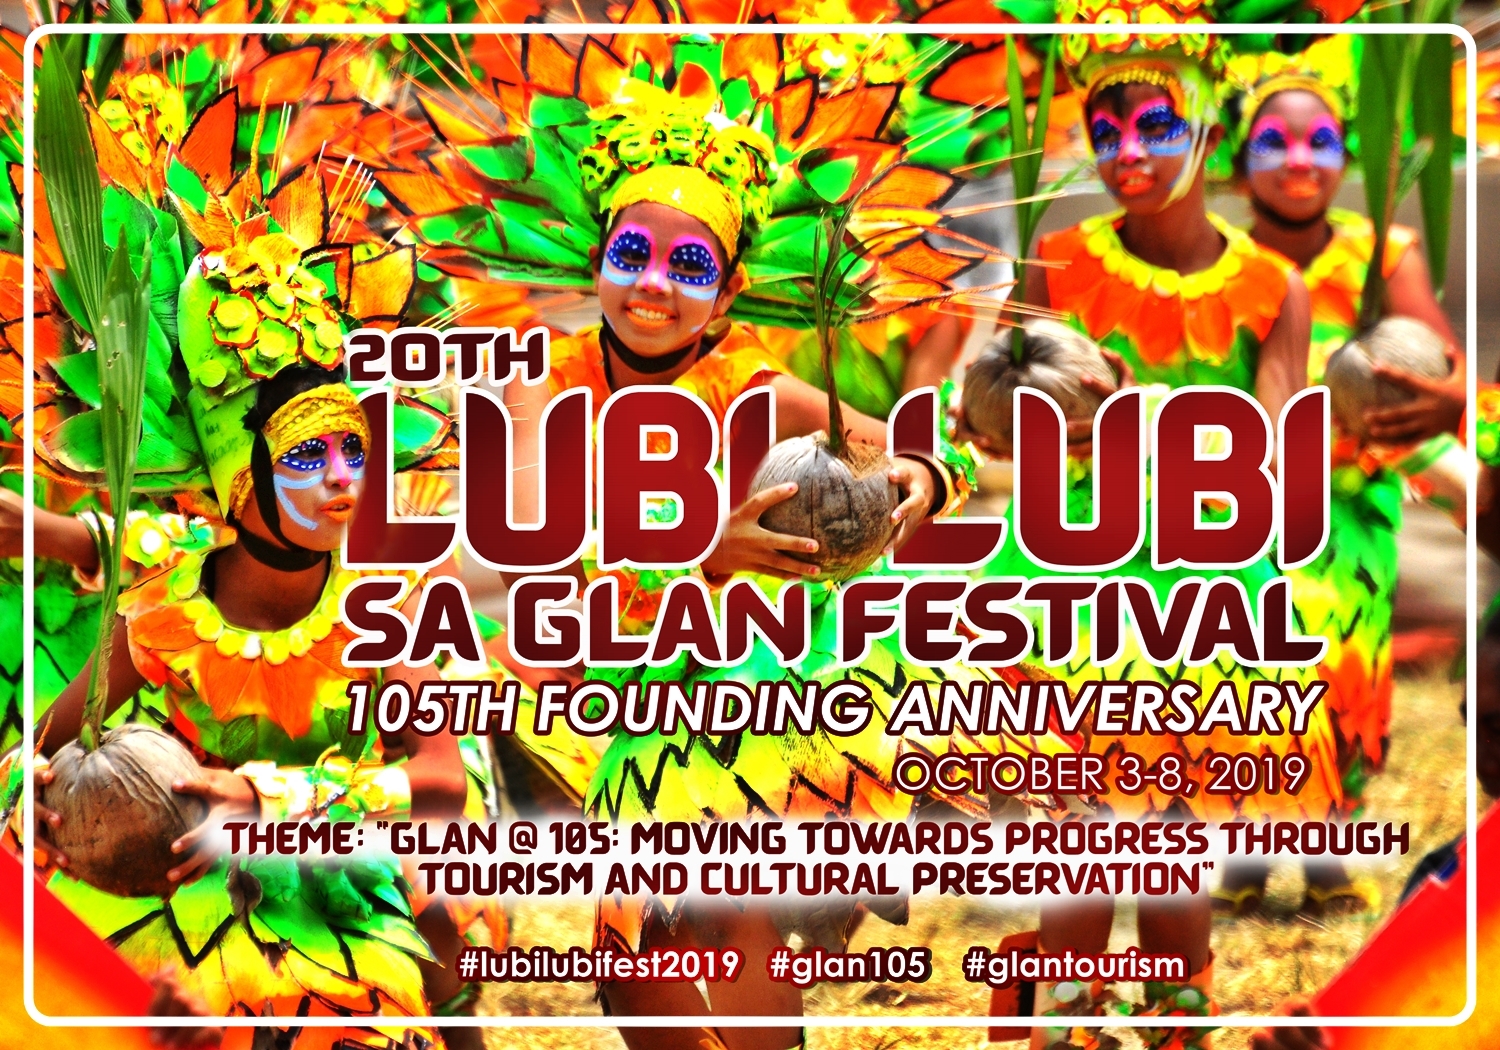 We're going to Lubi-lubi sa Glan Festival this October! | My Mindanao ...